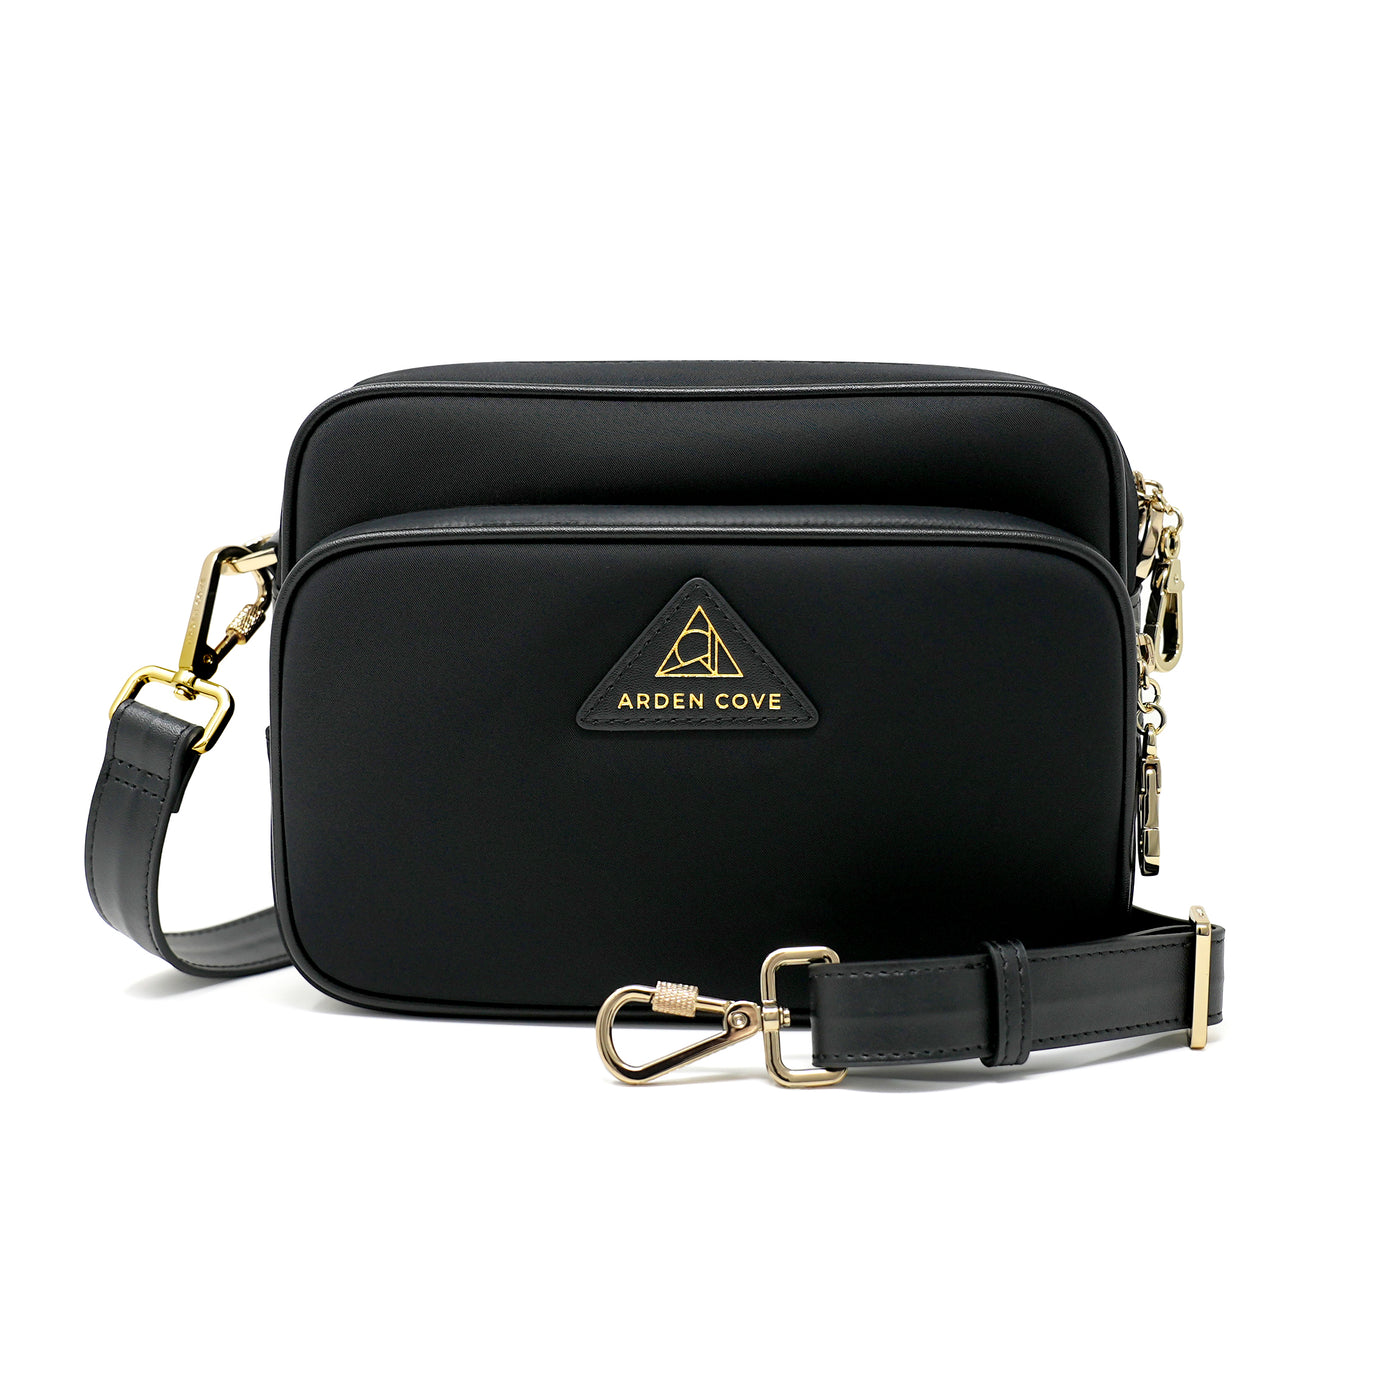 Anti-theft Water-resistant Travel Crossbody - Crissy Full Crossbody in Black Gold with slash-resistant wide faux leather strap & locking clasps straps - front view - Arden Cove